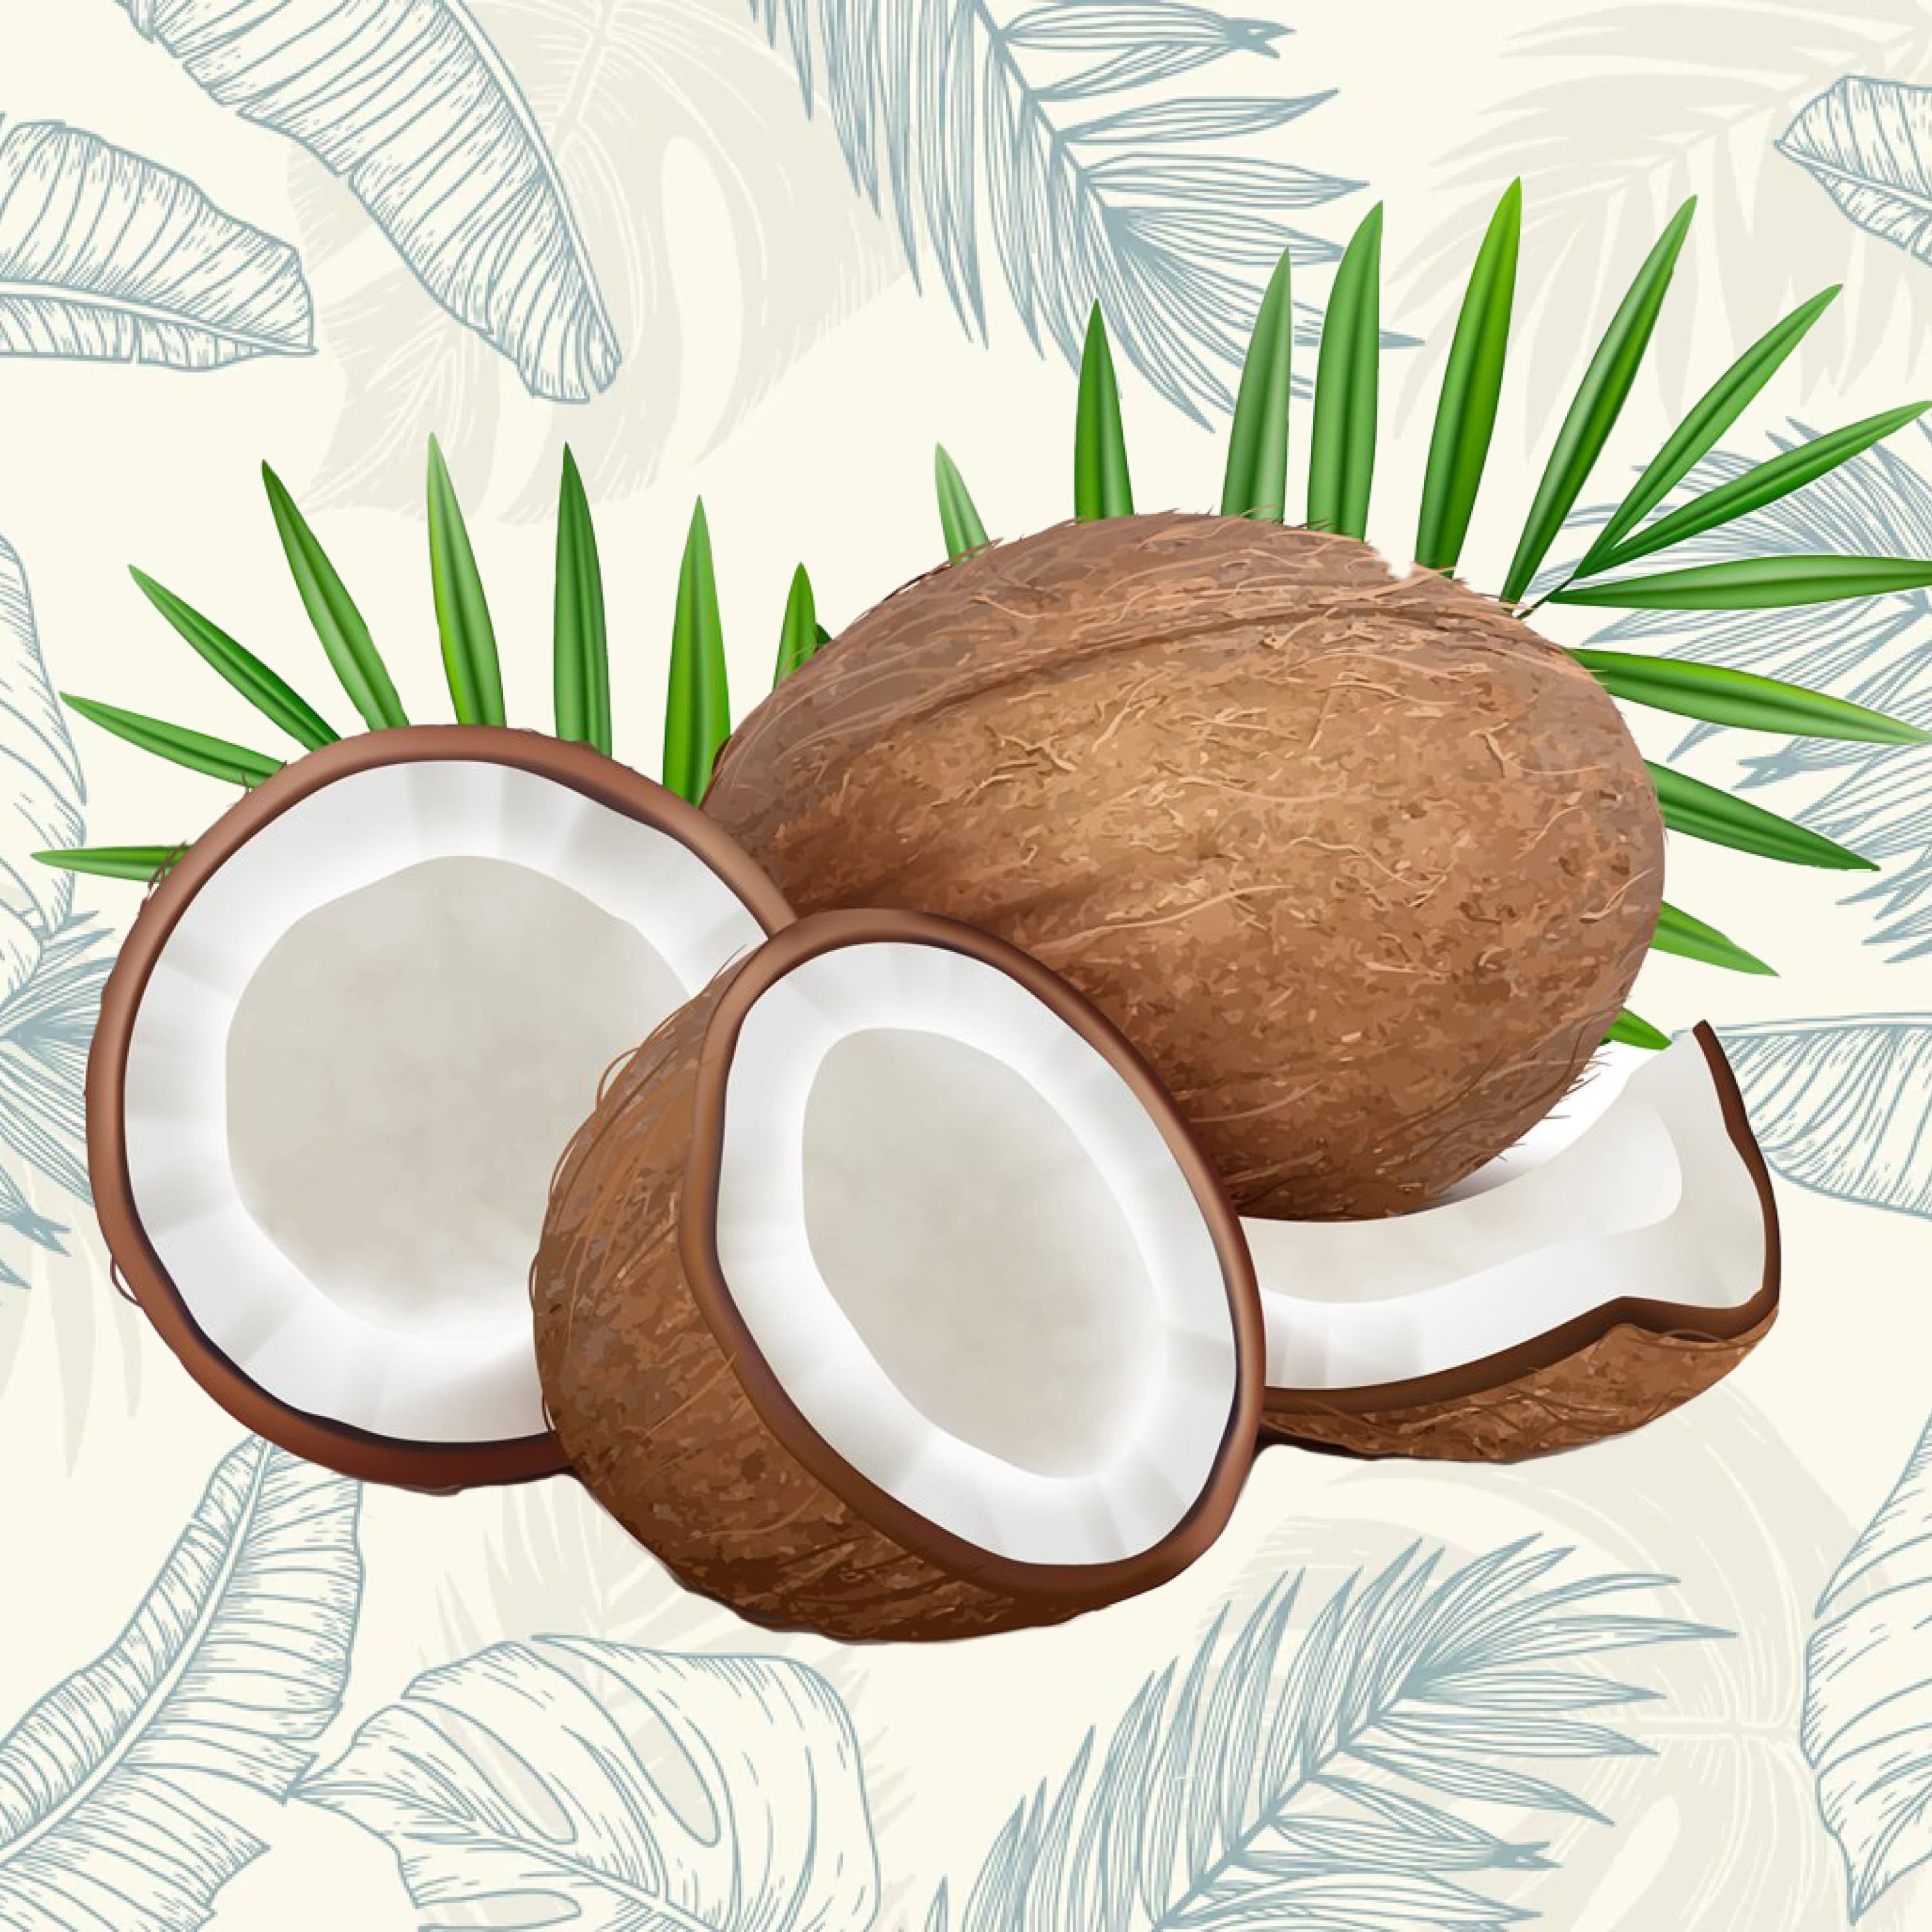 Coconut. Fresh tropical opened coco fruit with milk and palm cover.